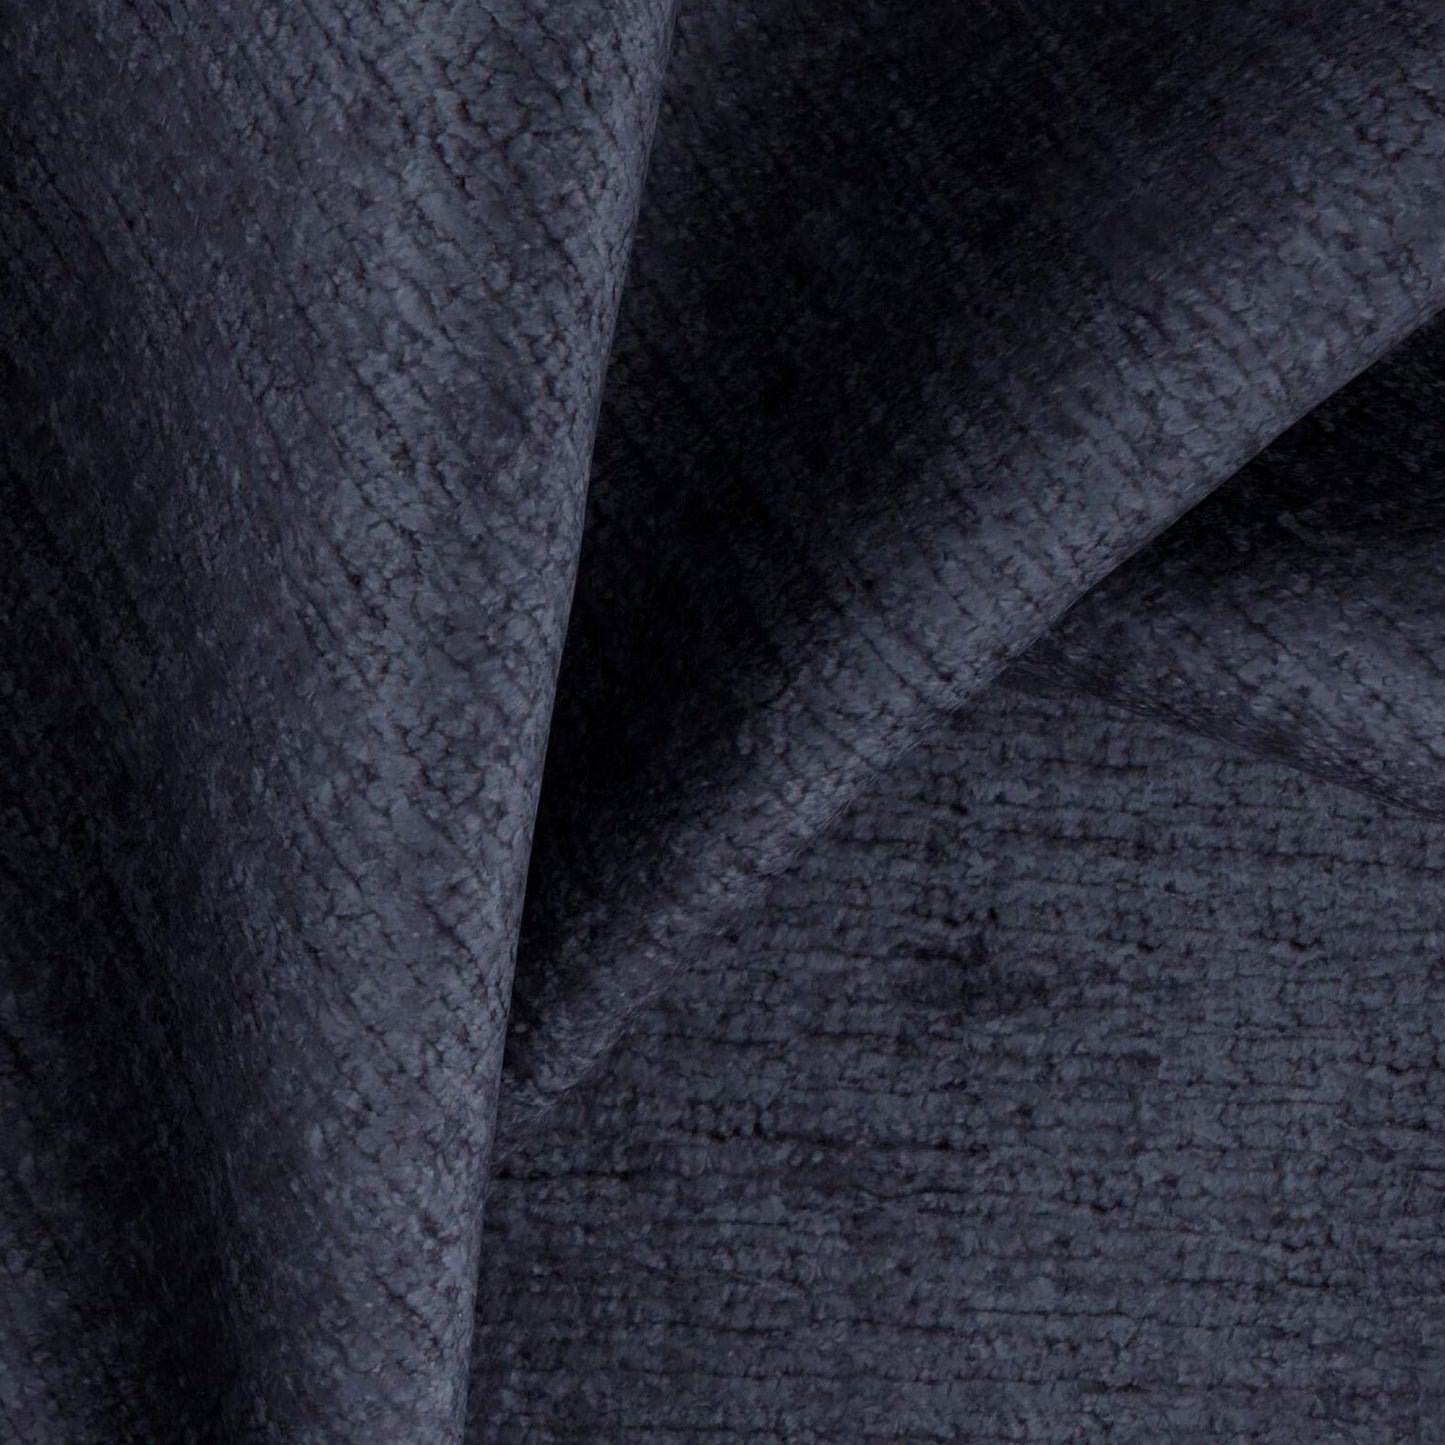 MONSIEUR NAVY LUXURY CHENILLE FABRIC SAMPLE | SPECIAL COLLECTION | # 2